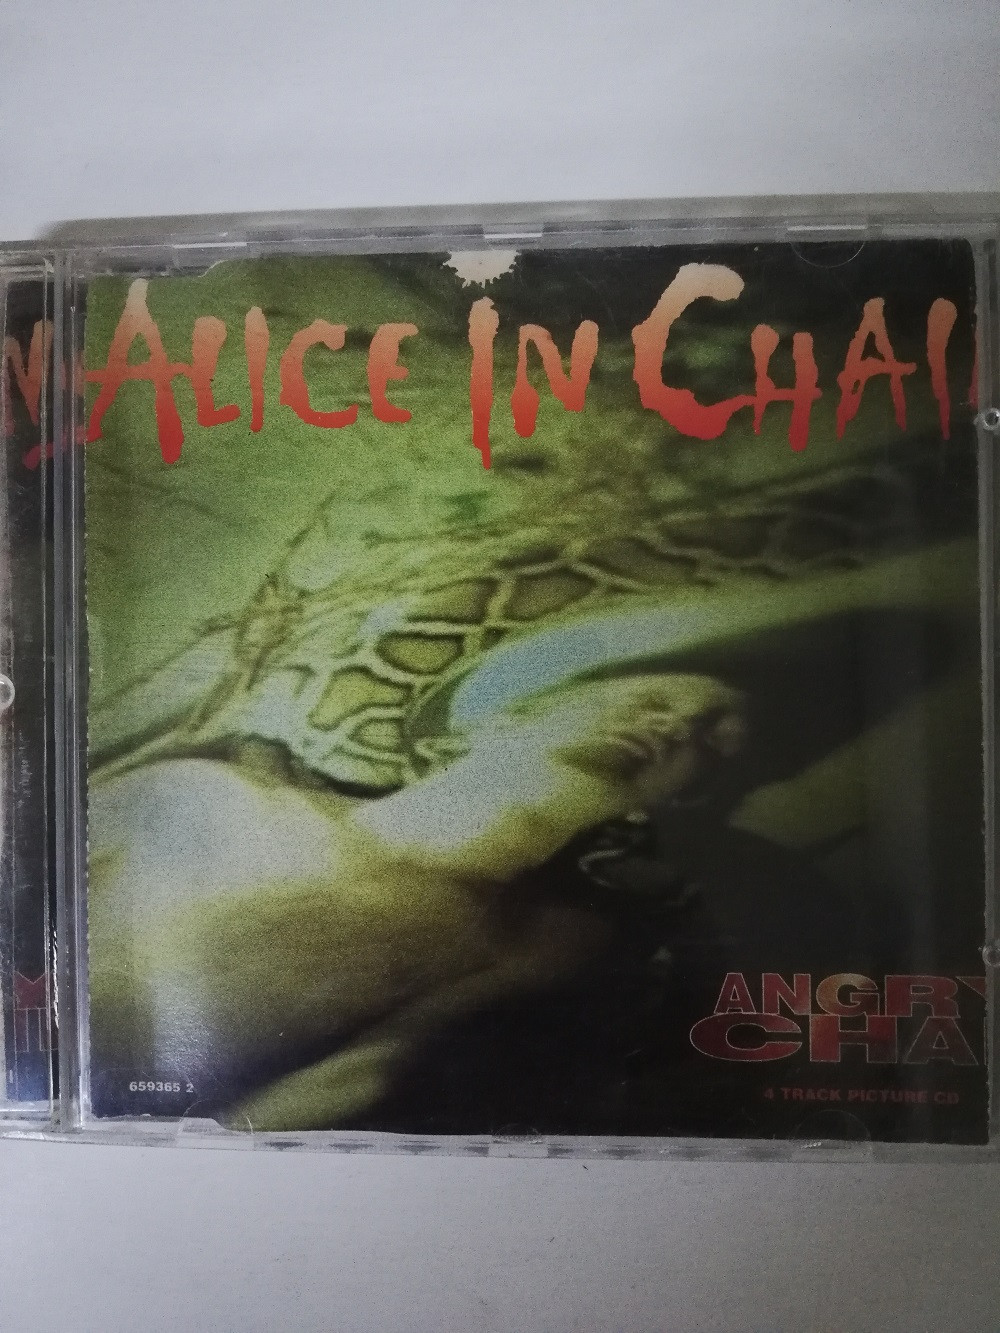 Imagen CD ALICE IN CHAIN - ANGRY CHAIR 1